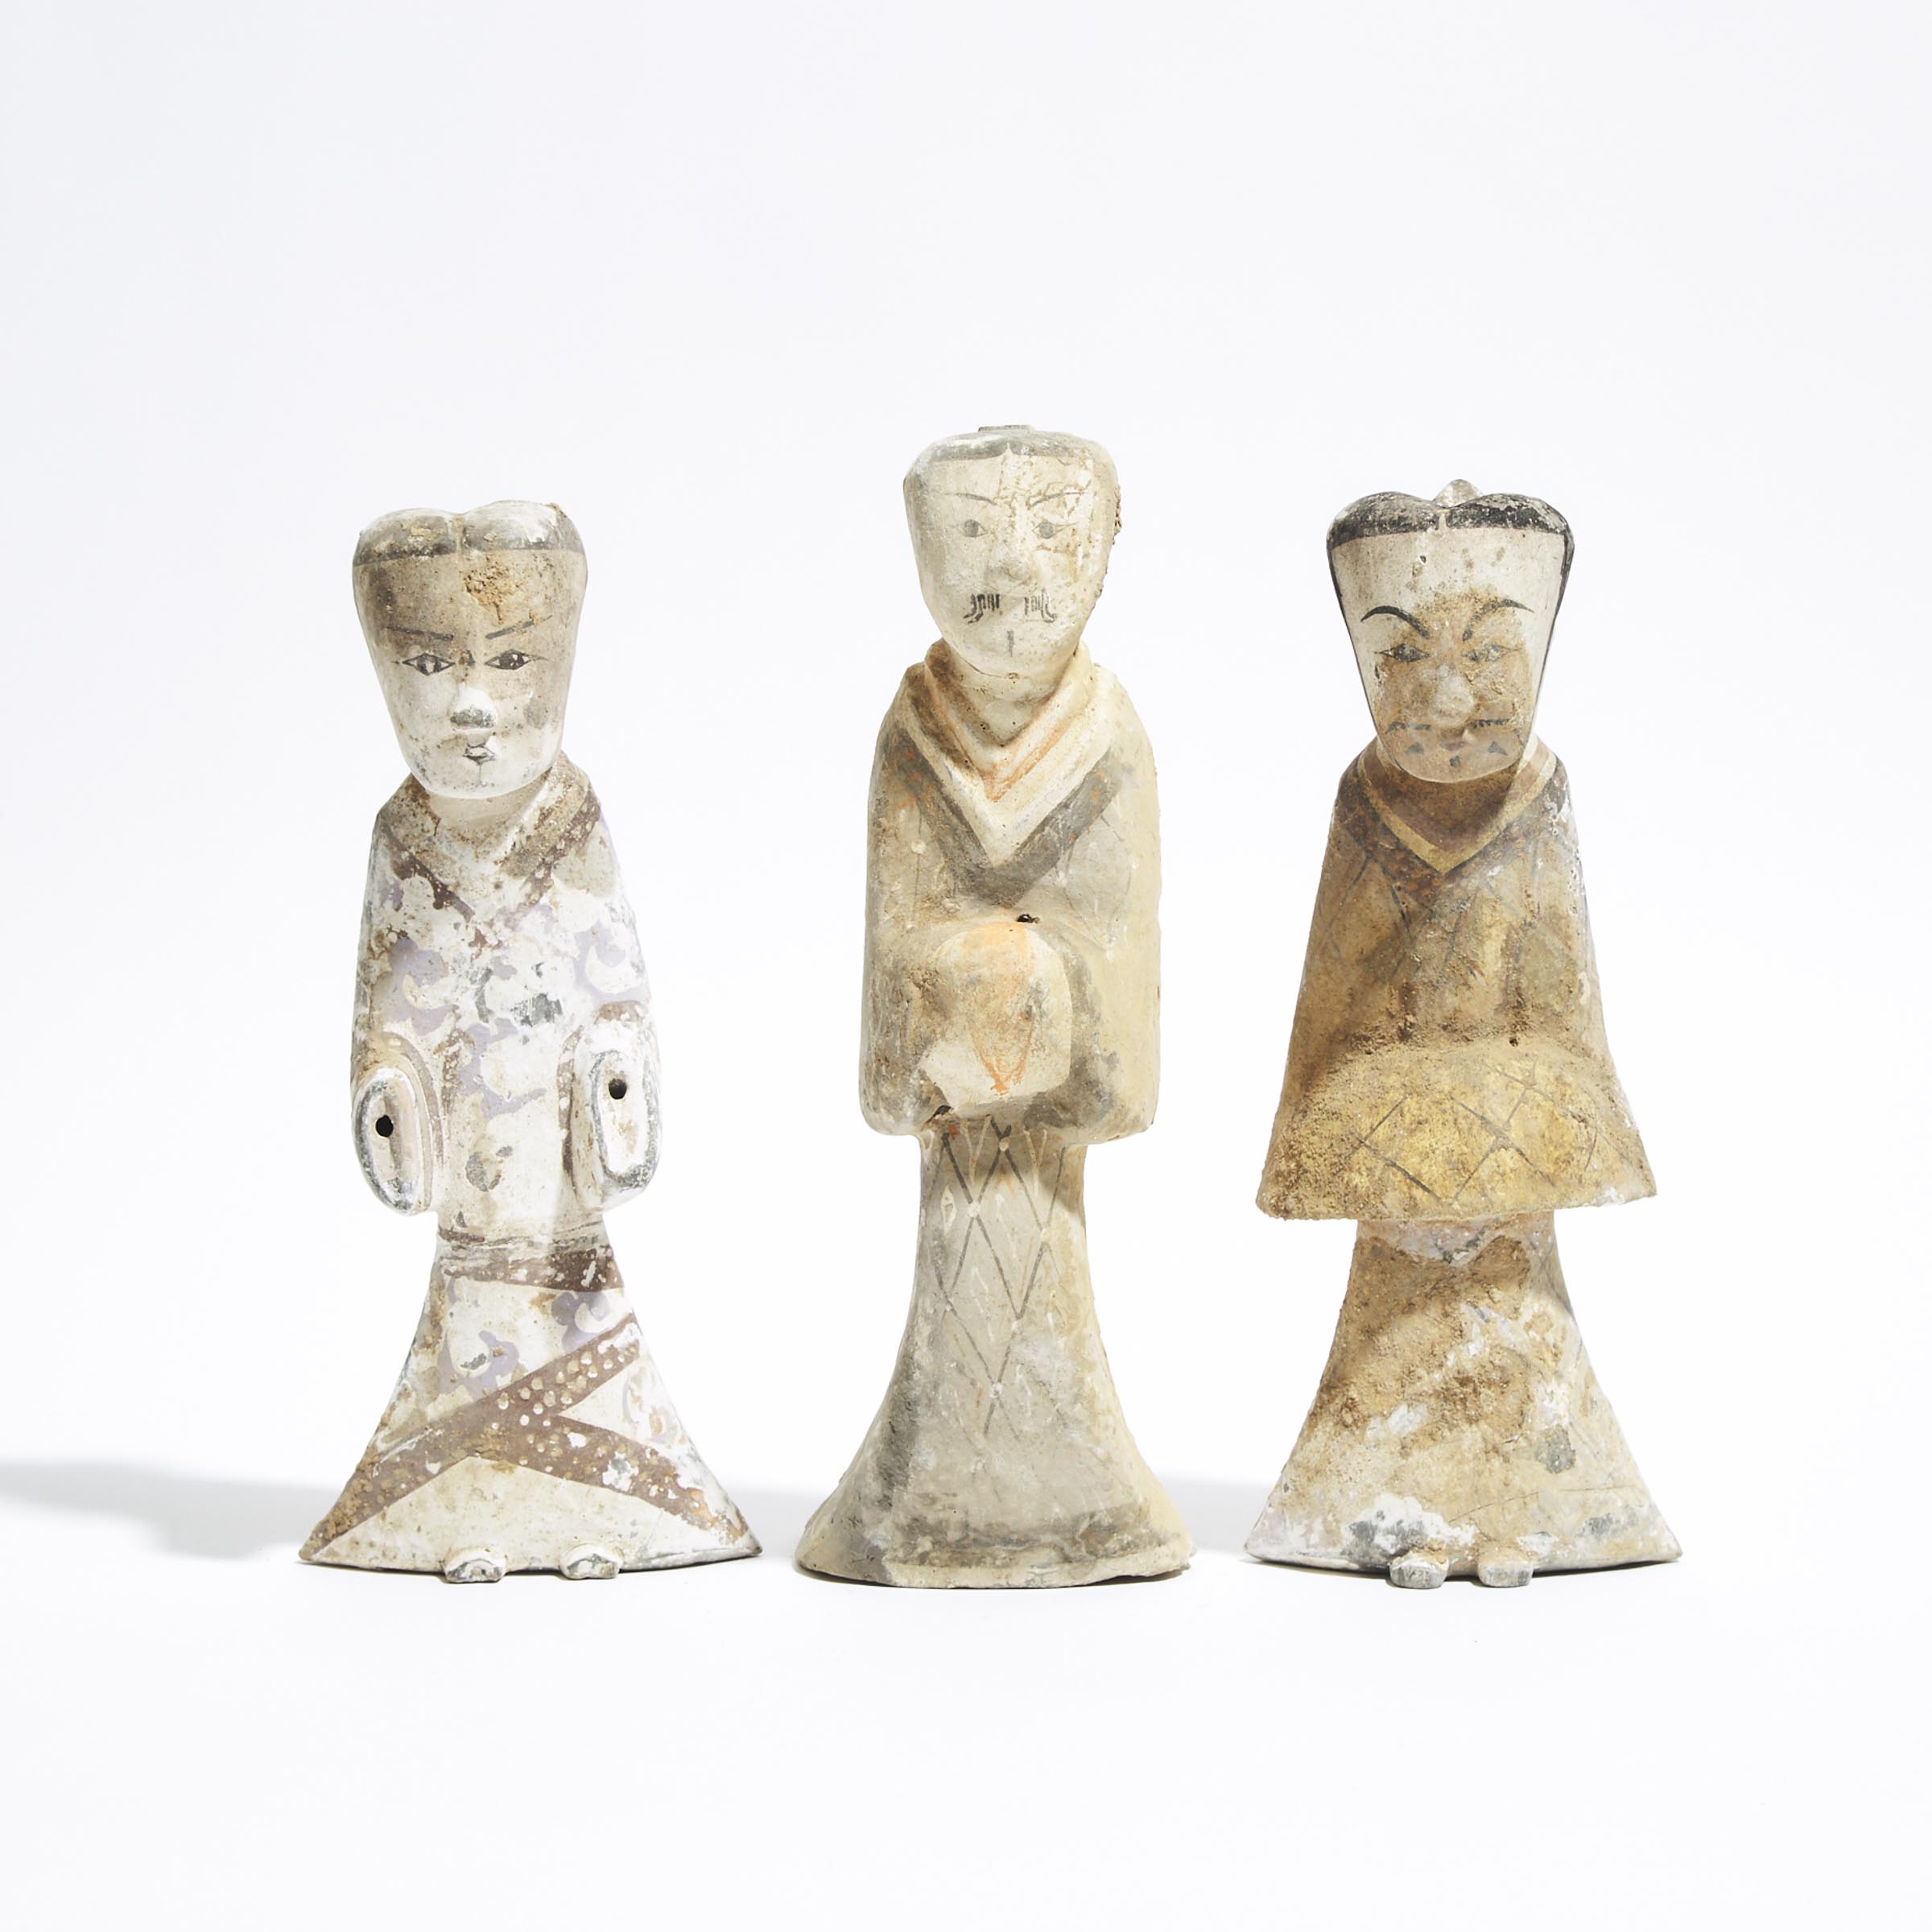 A Group of Three Painted Pottery Figures of Attendants, Han Dynasty (206 BC - AD 220)